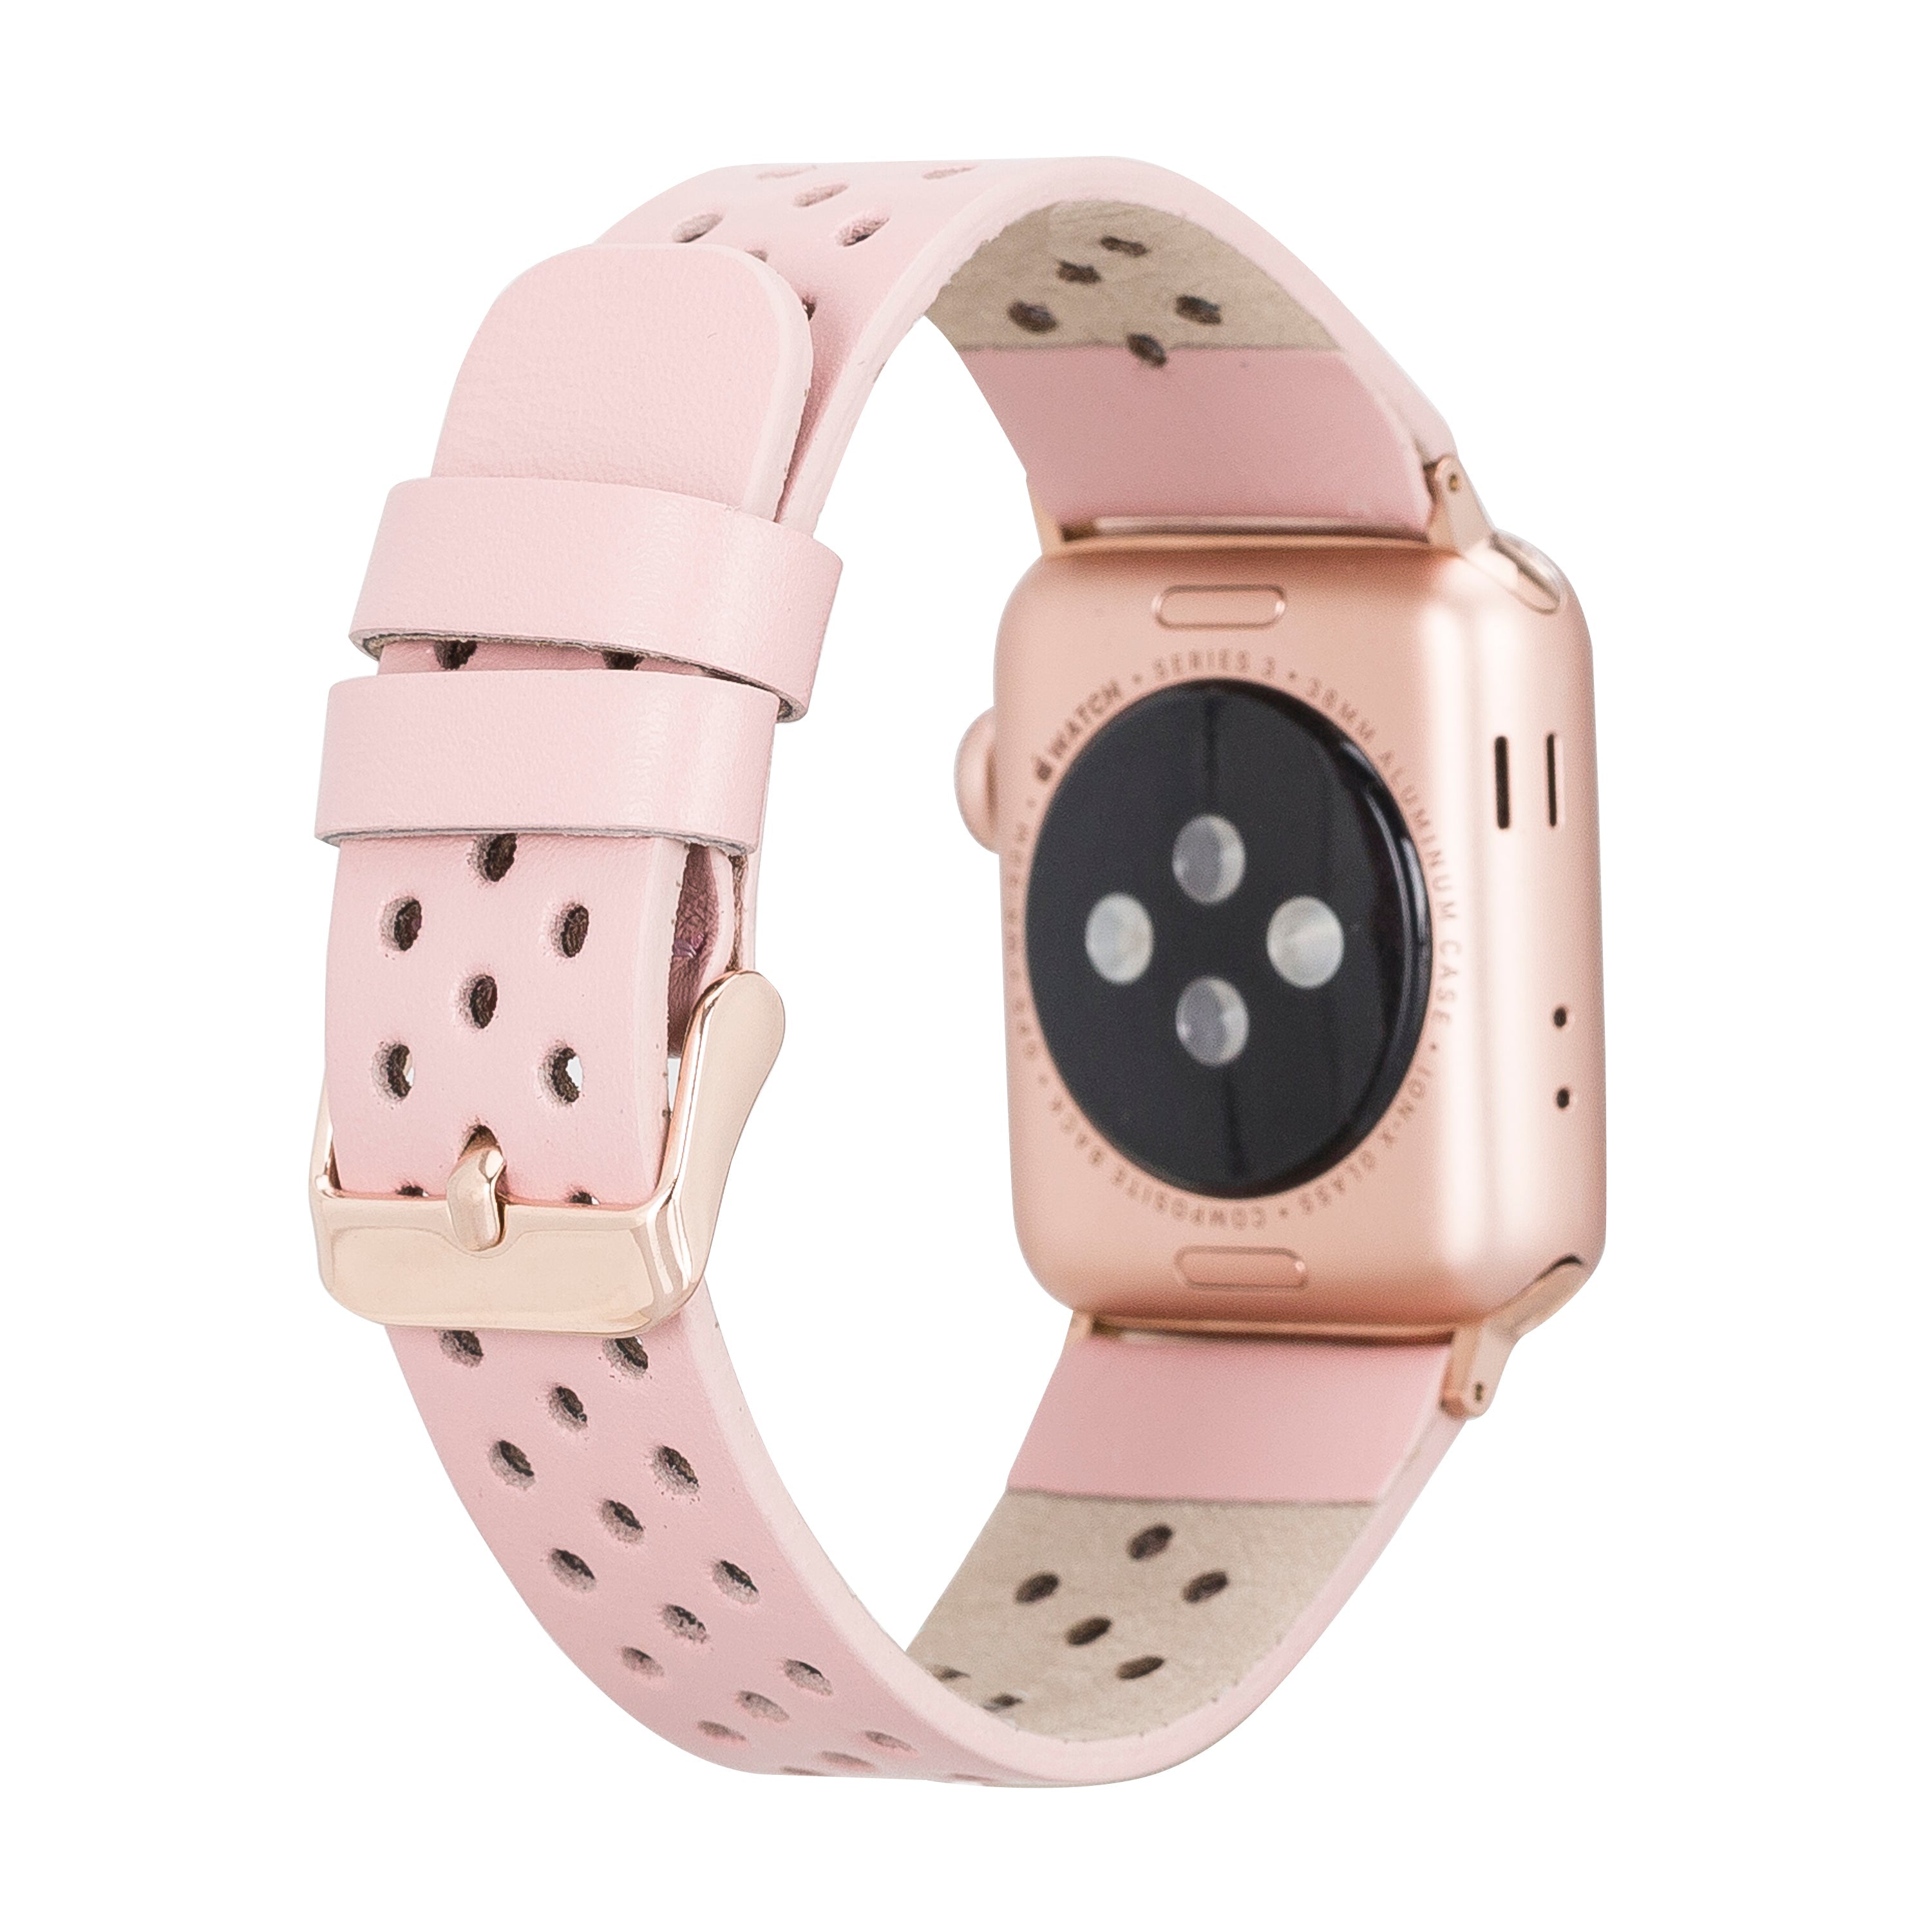 LupinnyLeather Chester Watch Band for Apple Watch & Fitbit Versa/Sense (Pink) 2